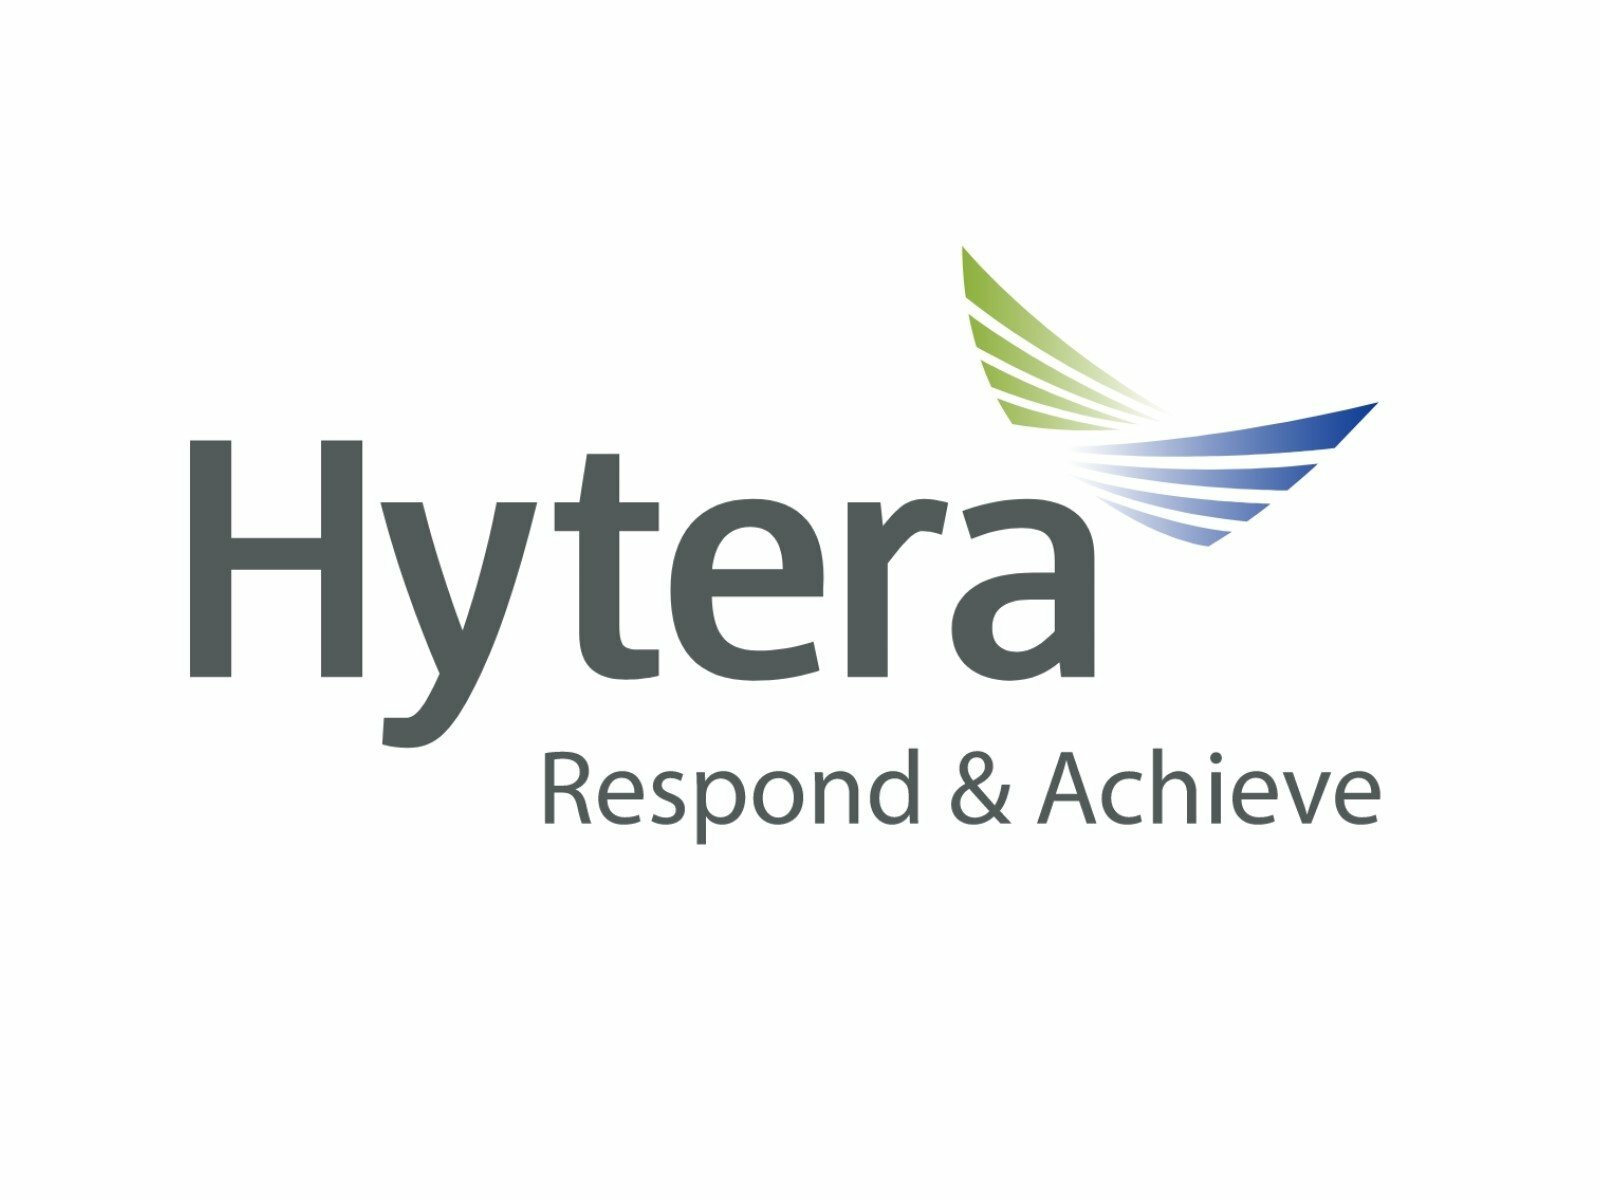 Hytera SW00074 Single Frequency Repeater Mode Lizenz